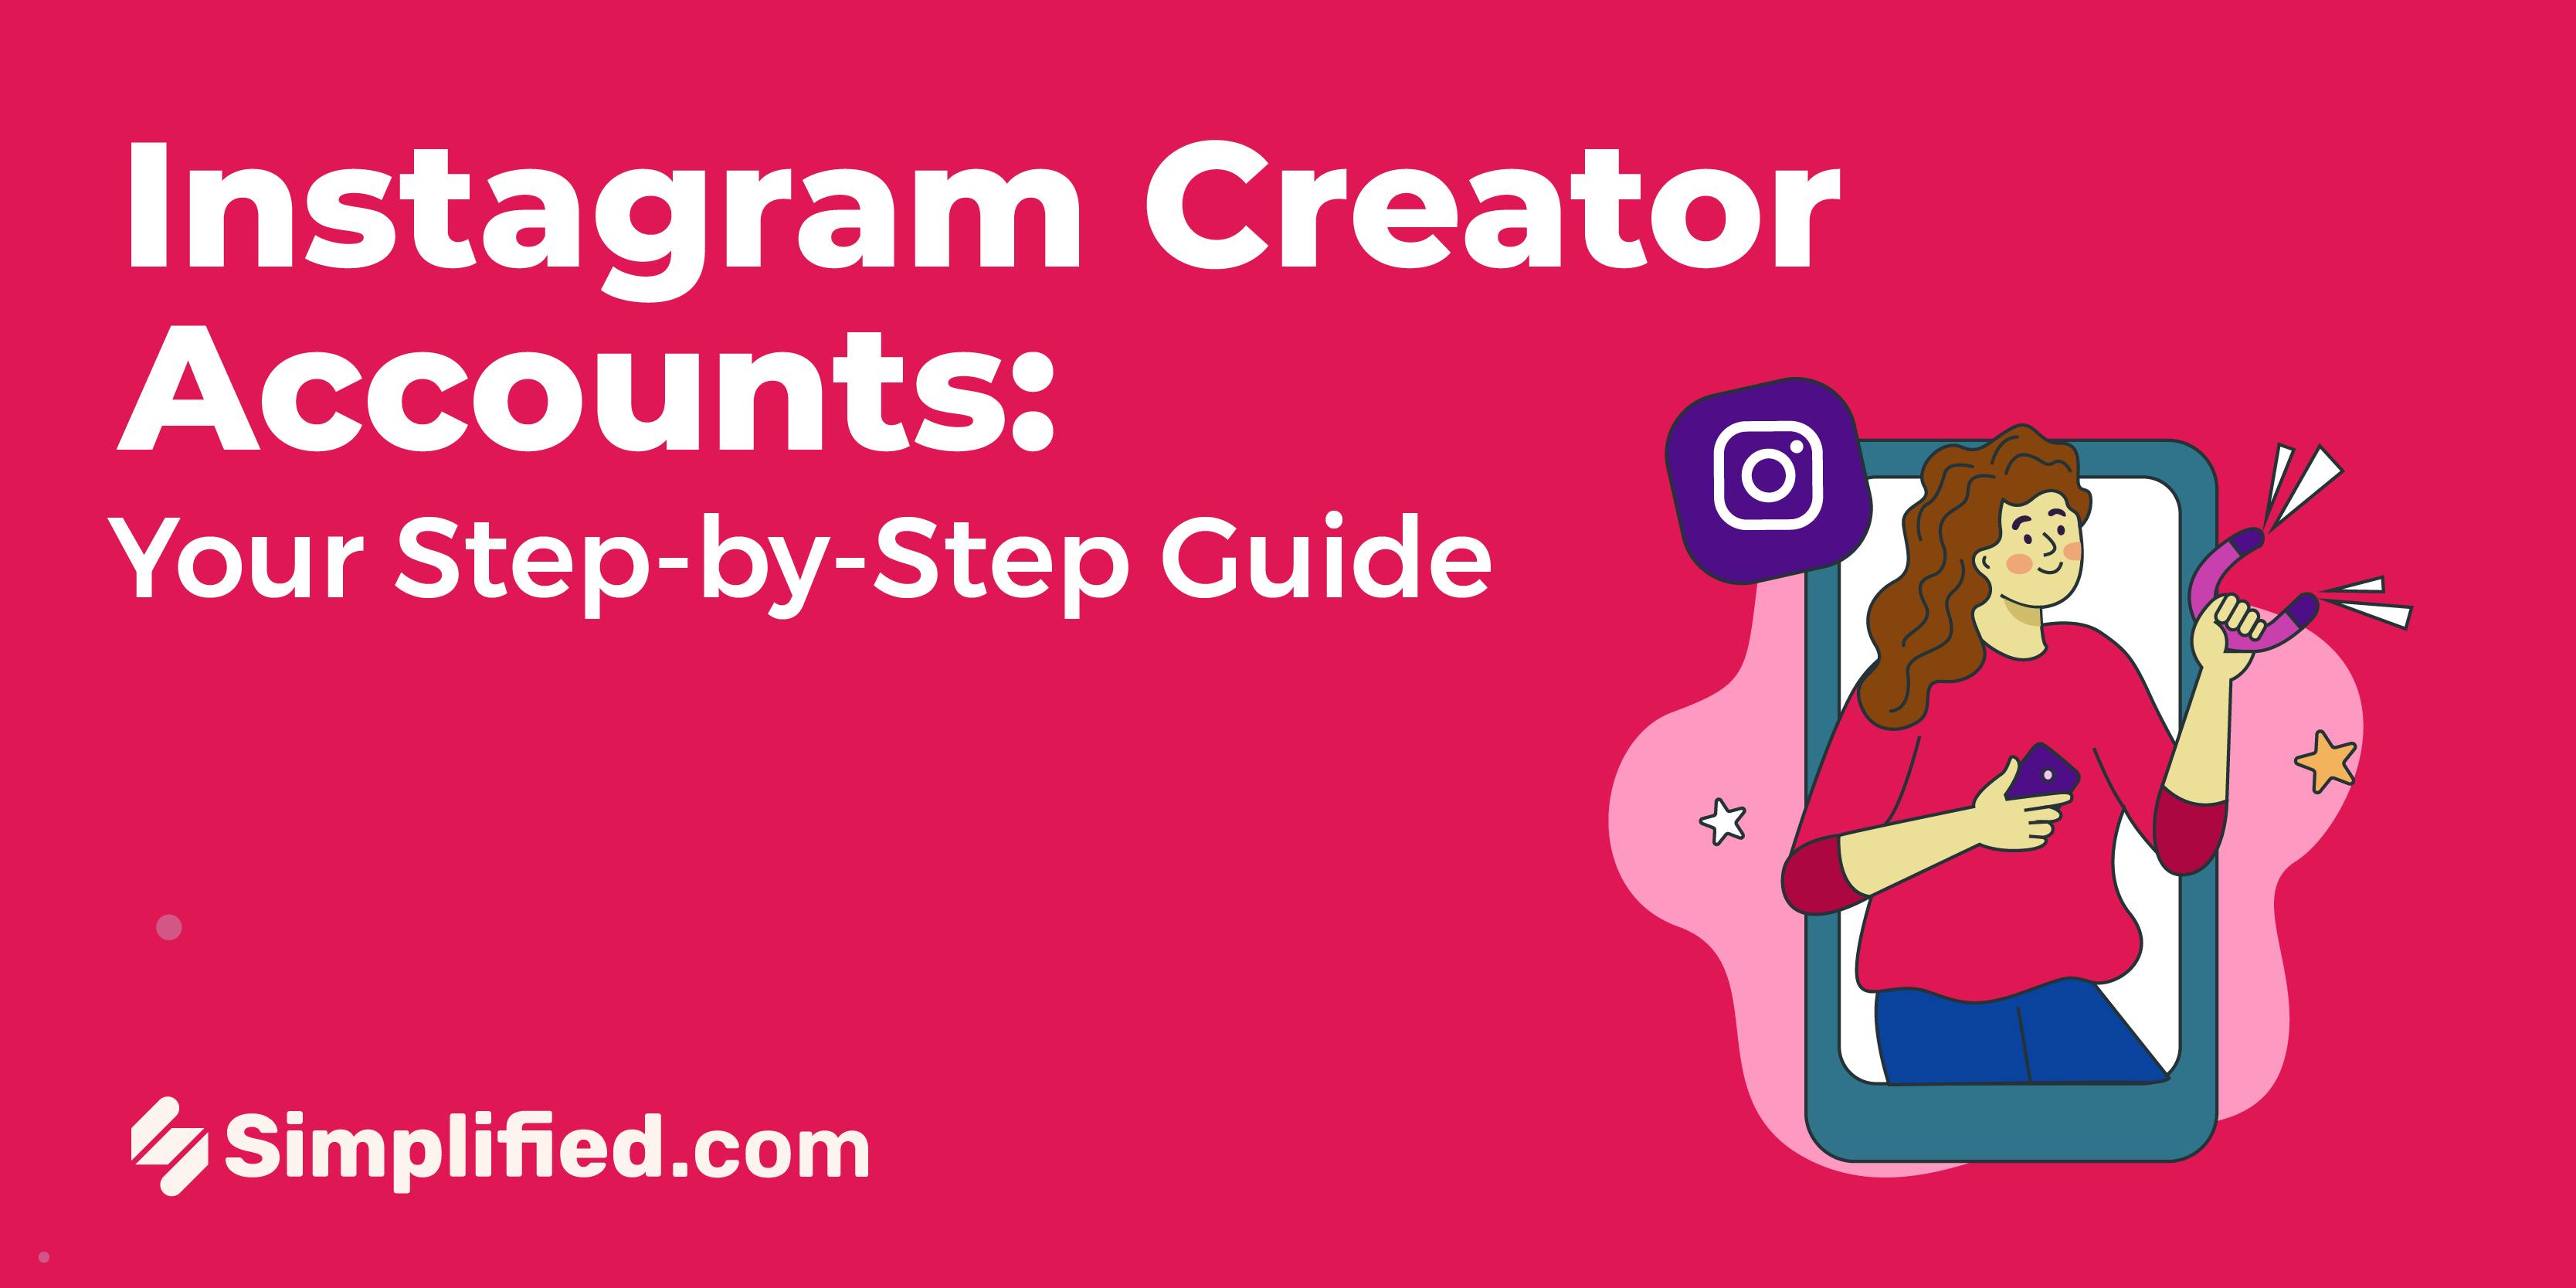 Instagram Creator Account: Everything You Need to Know